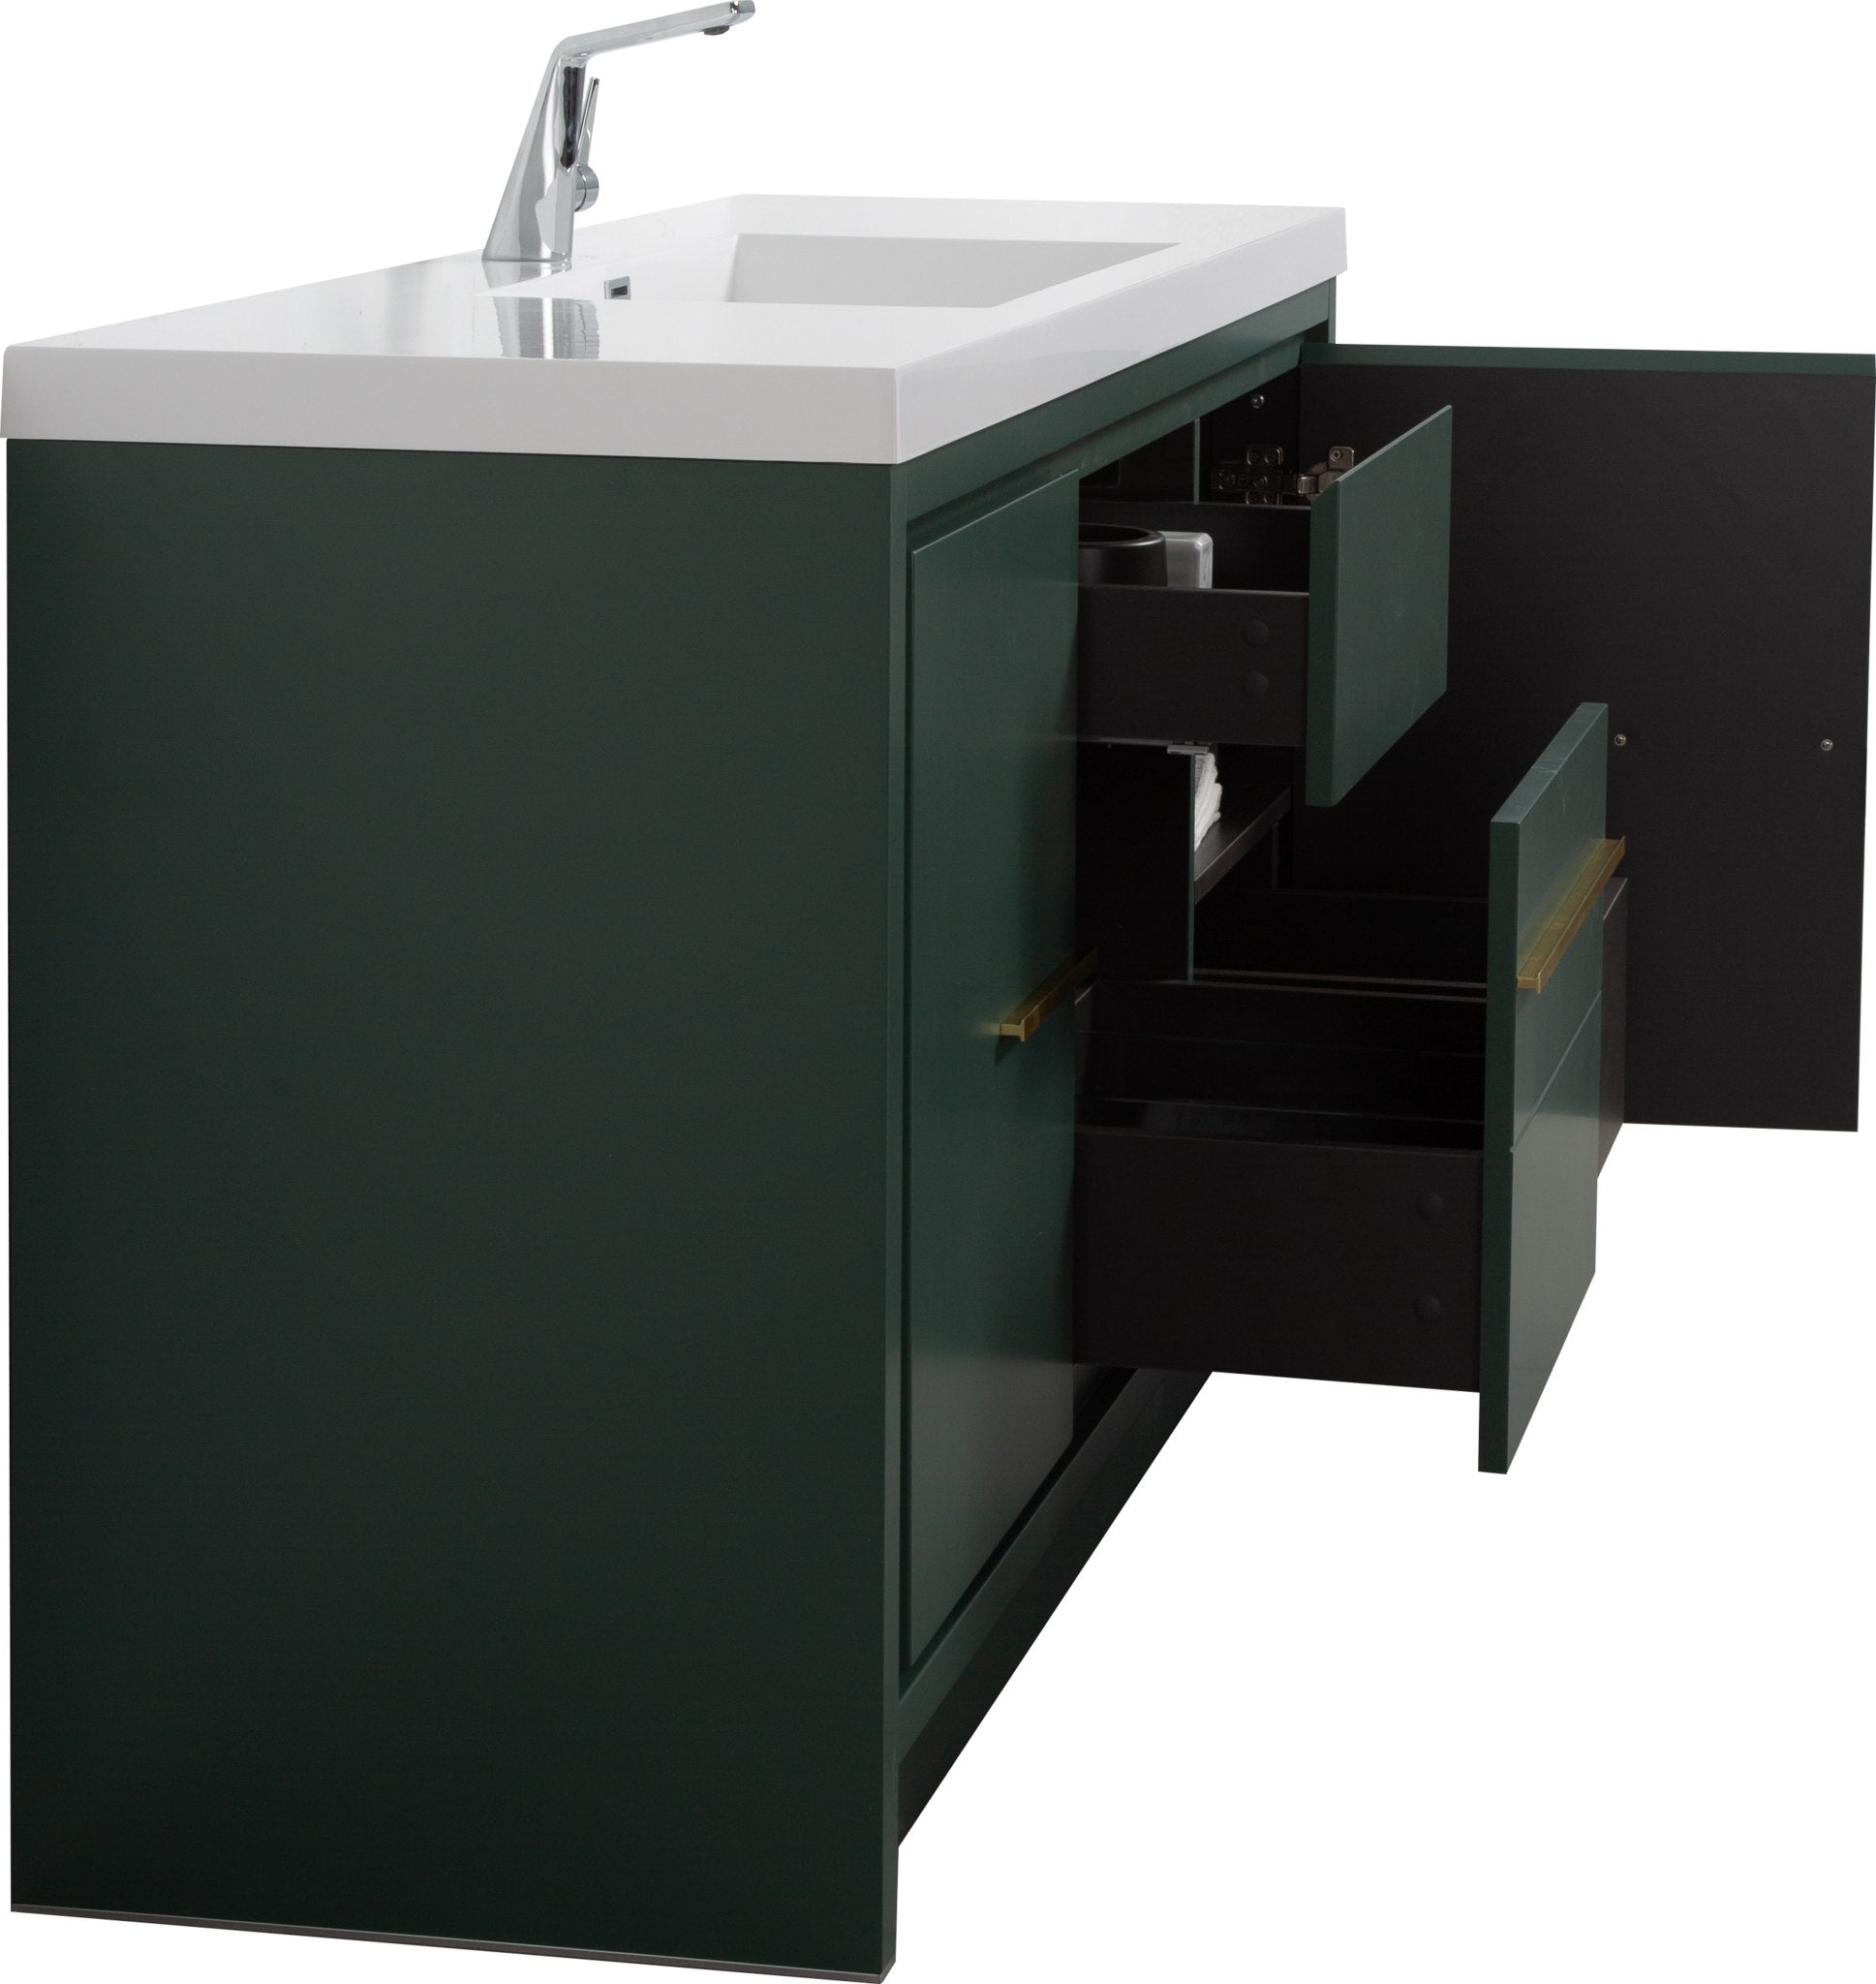 Granada 59 Nordic Green With Brush Gold Handle Cabinet, Square Cultured Marble Single Sink, Free Standing Modern Vanity Set